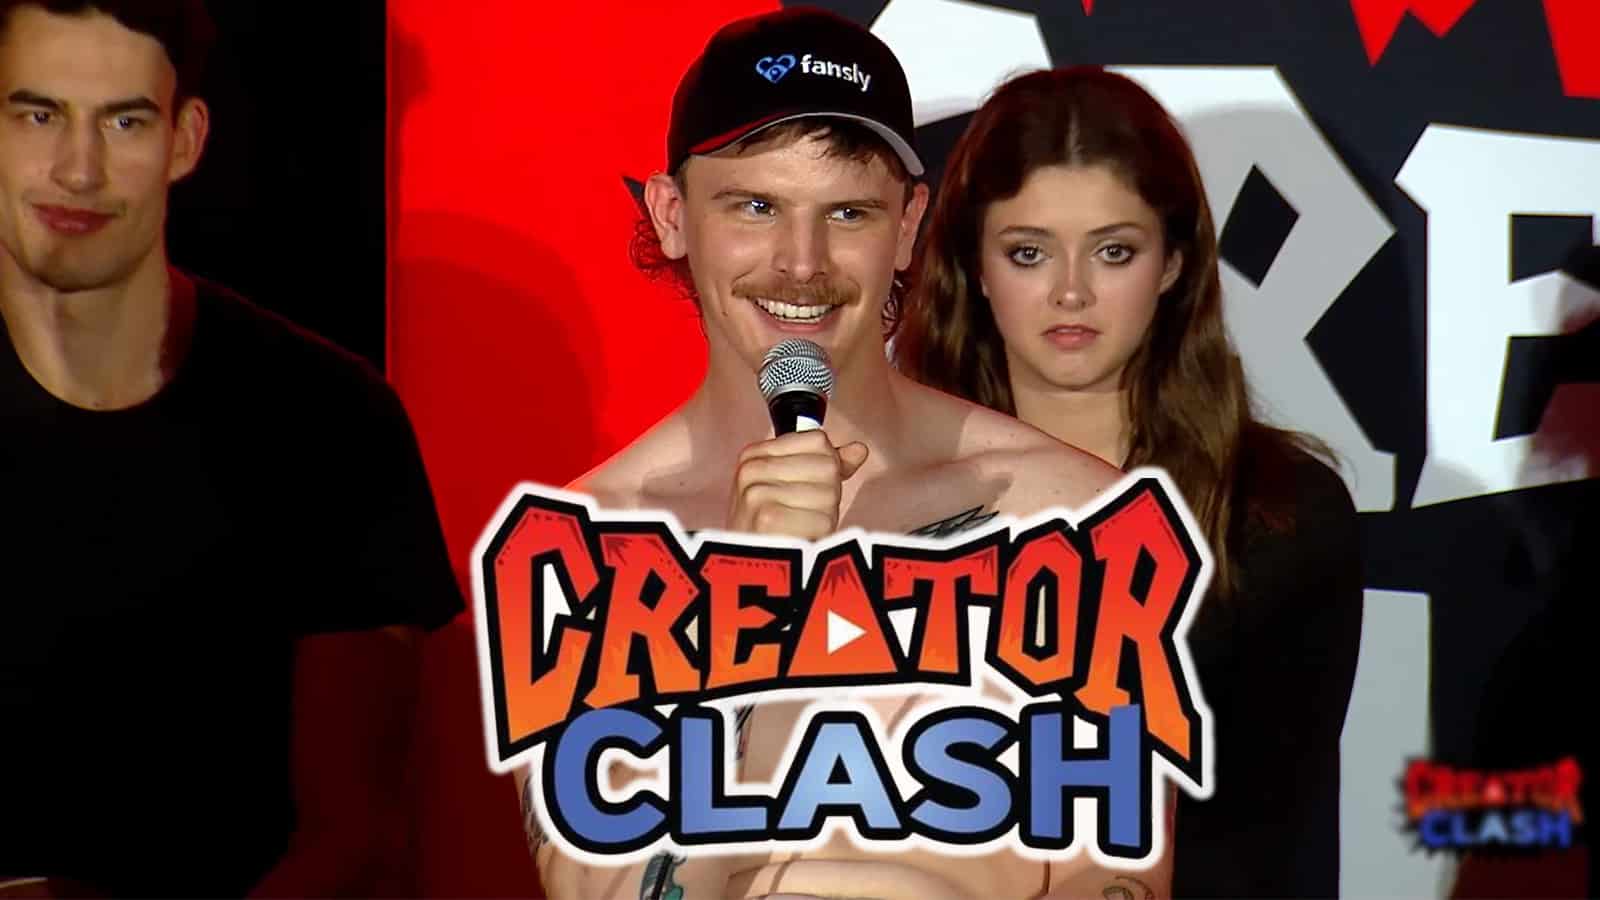 justaminx is CONFIRMED to fight in #CreatorClash #2 ! Who do you thin